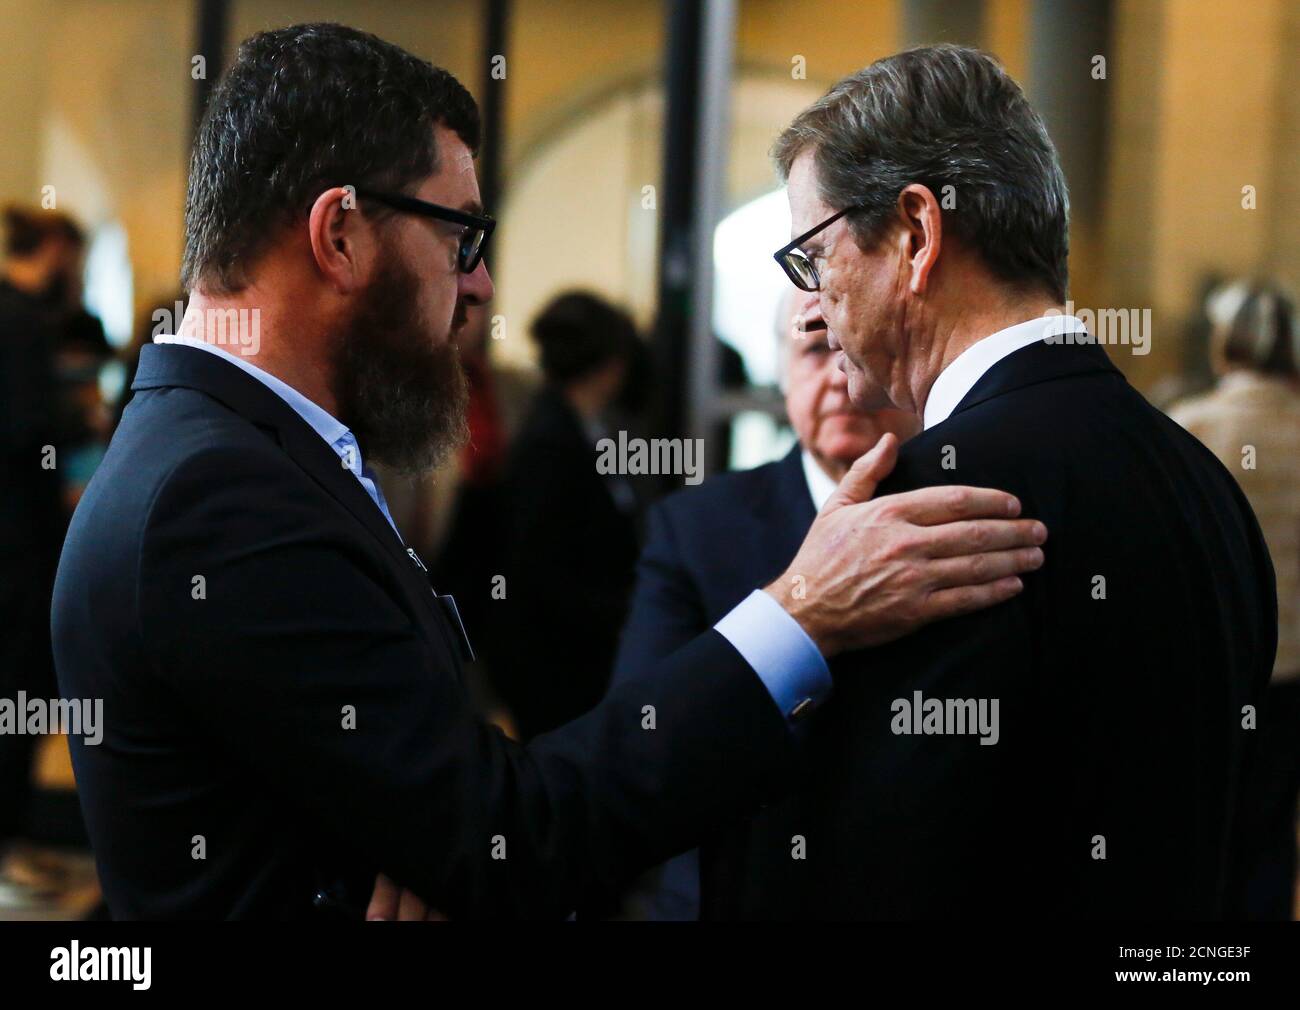 German former foreign minister Guido Westerwelle (R) chats with Kai Diekmann, chief editor of Bild newspaper, during a meeting in the Bundestag, the lower house of parliament, in Berlin December 17, 2013.      REUTERS/Thomas Peter (GERMANY  - Tags: POLITICS) Stock Photo